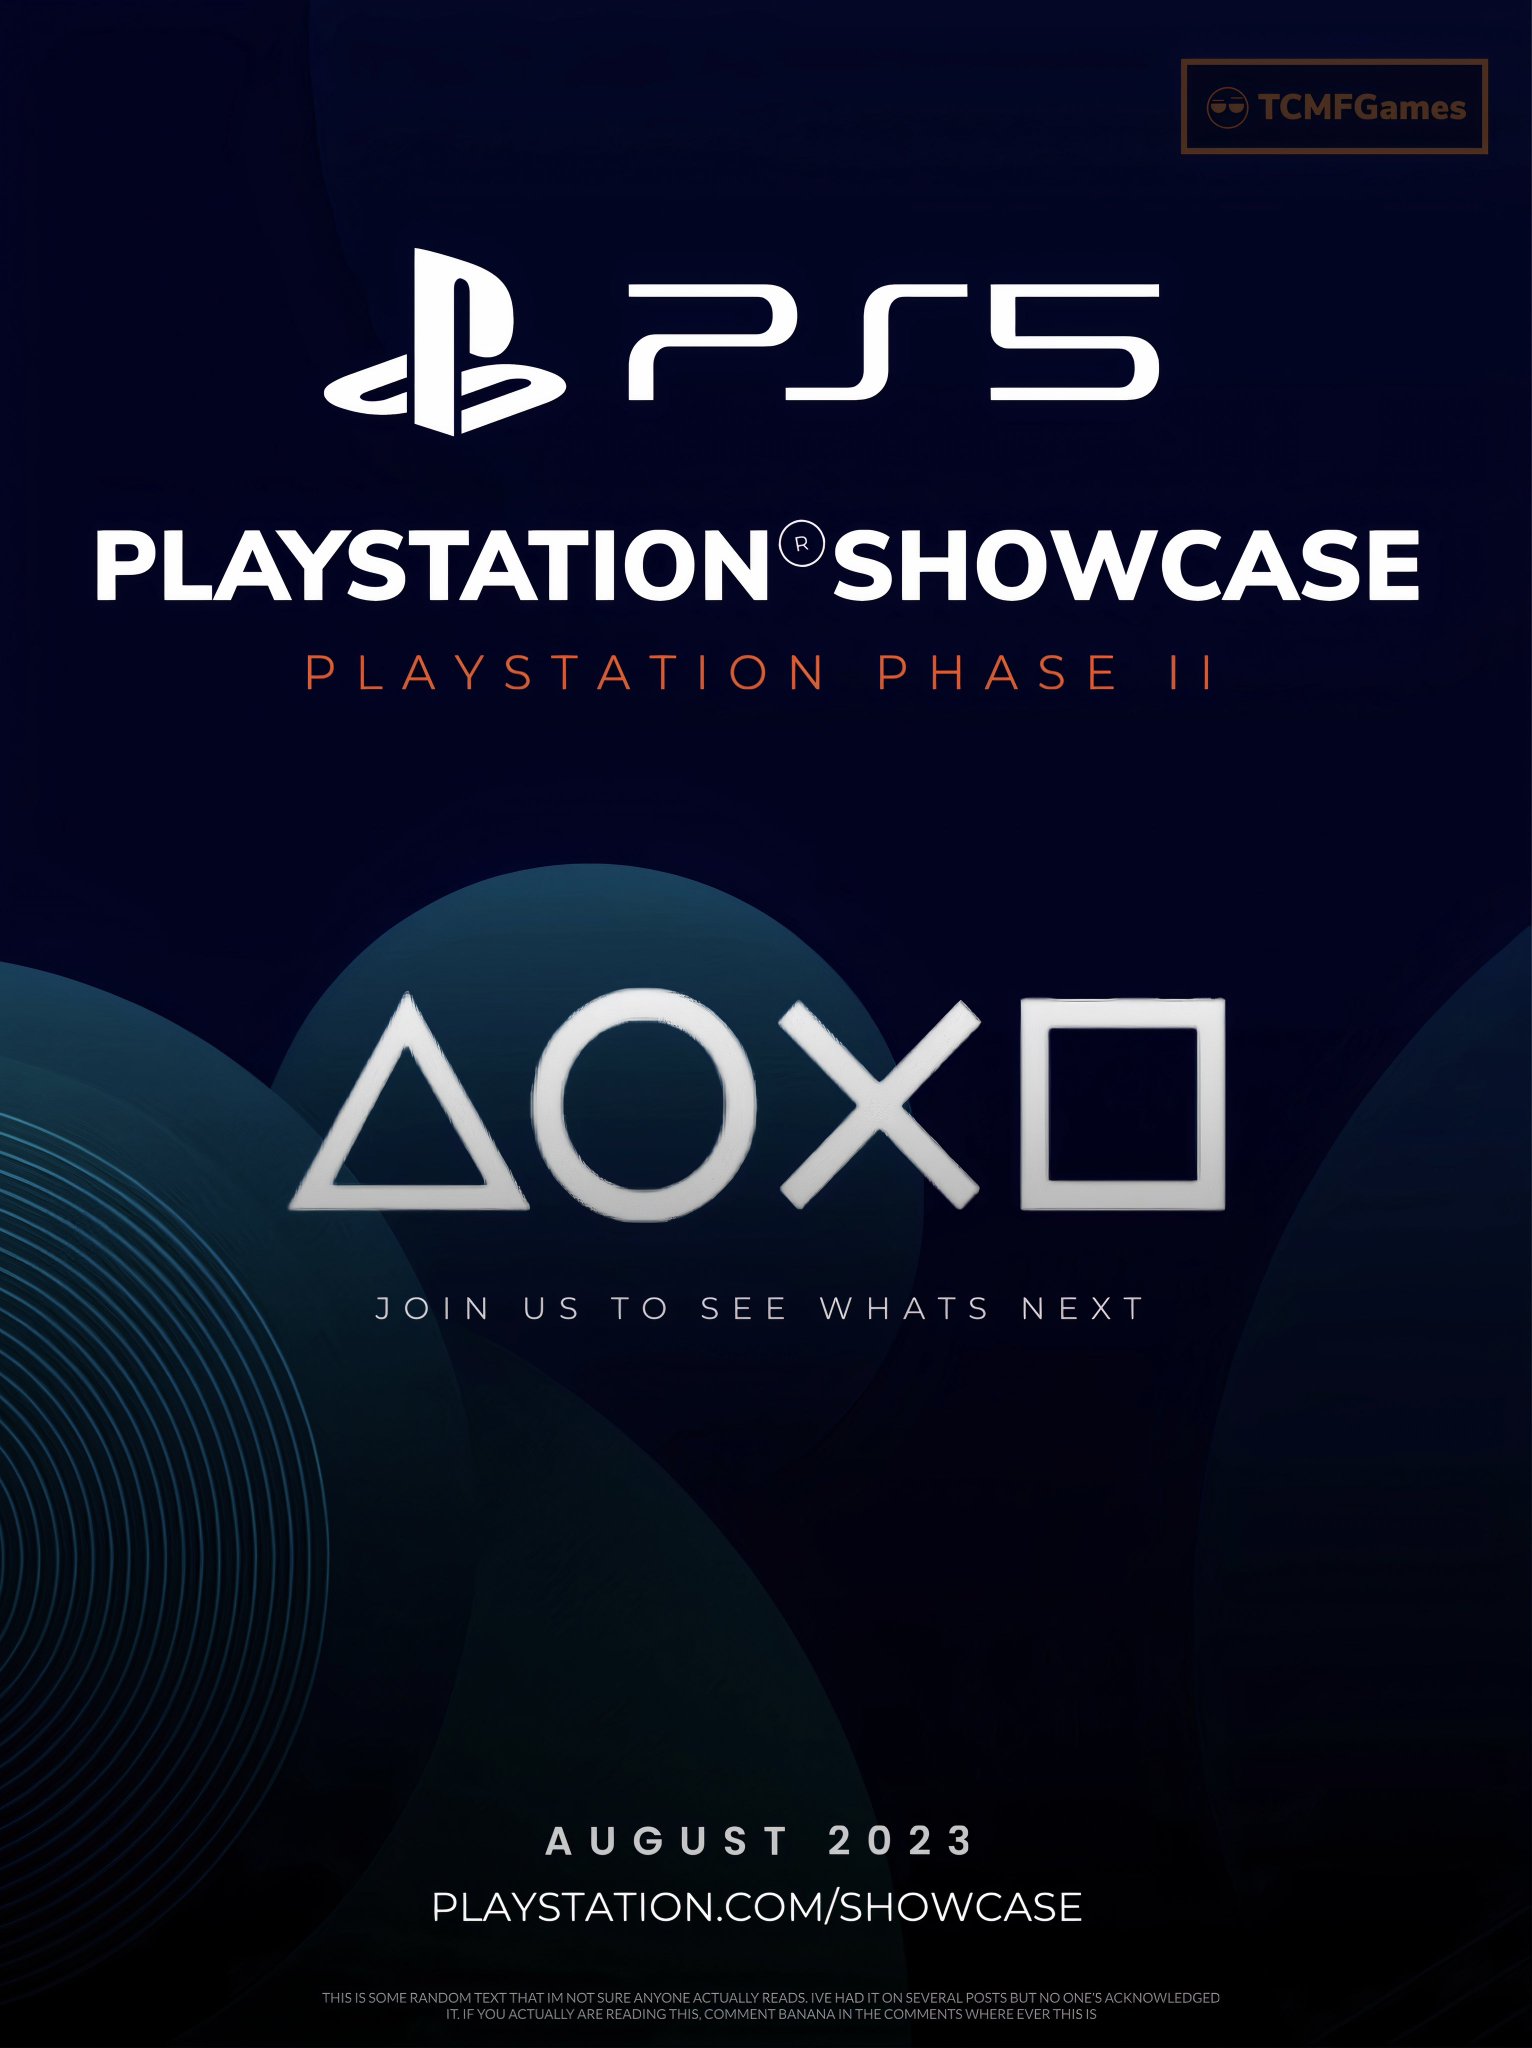 TCMFGames on X: Second PlayStation Showcase happening this year